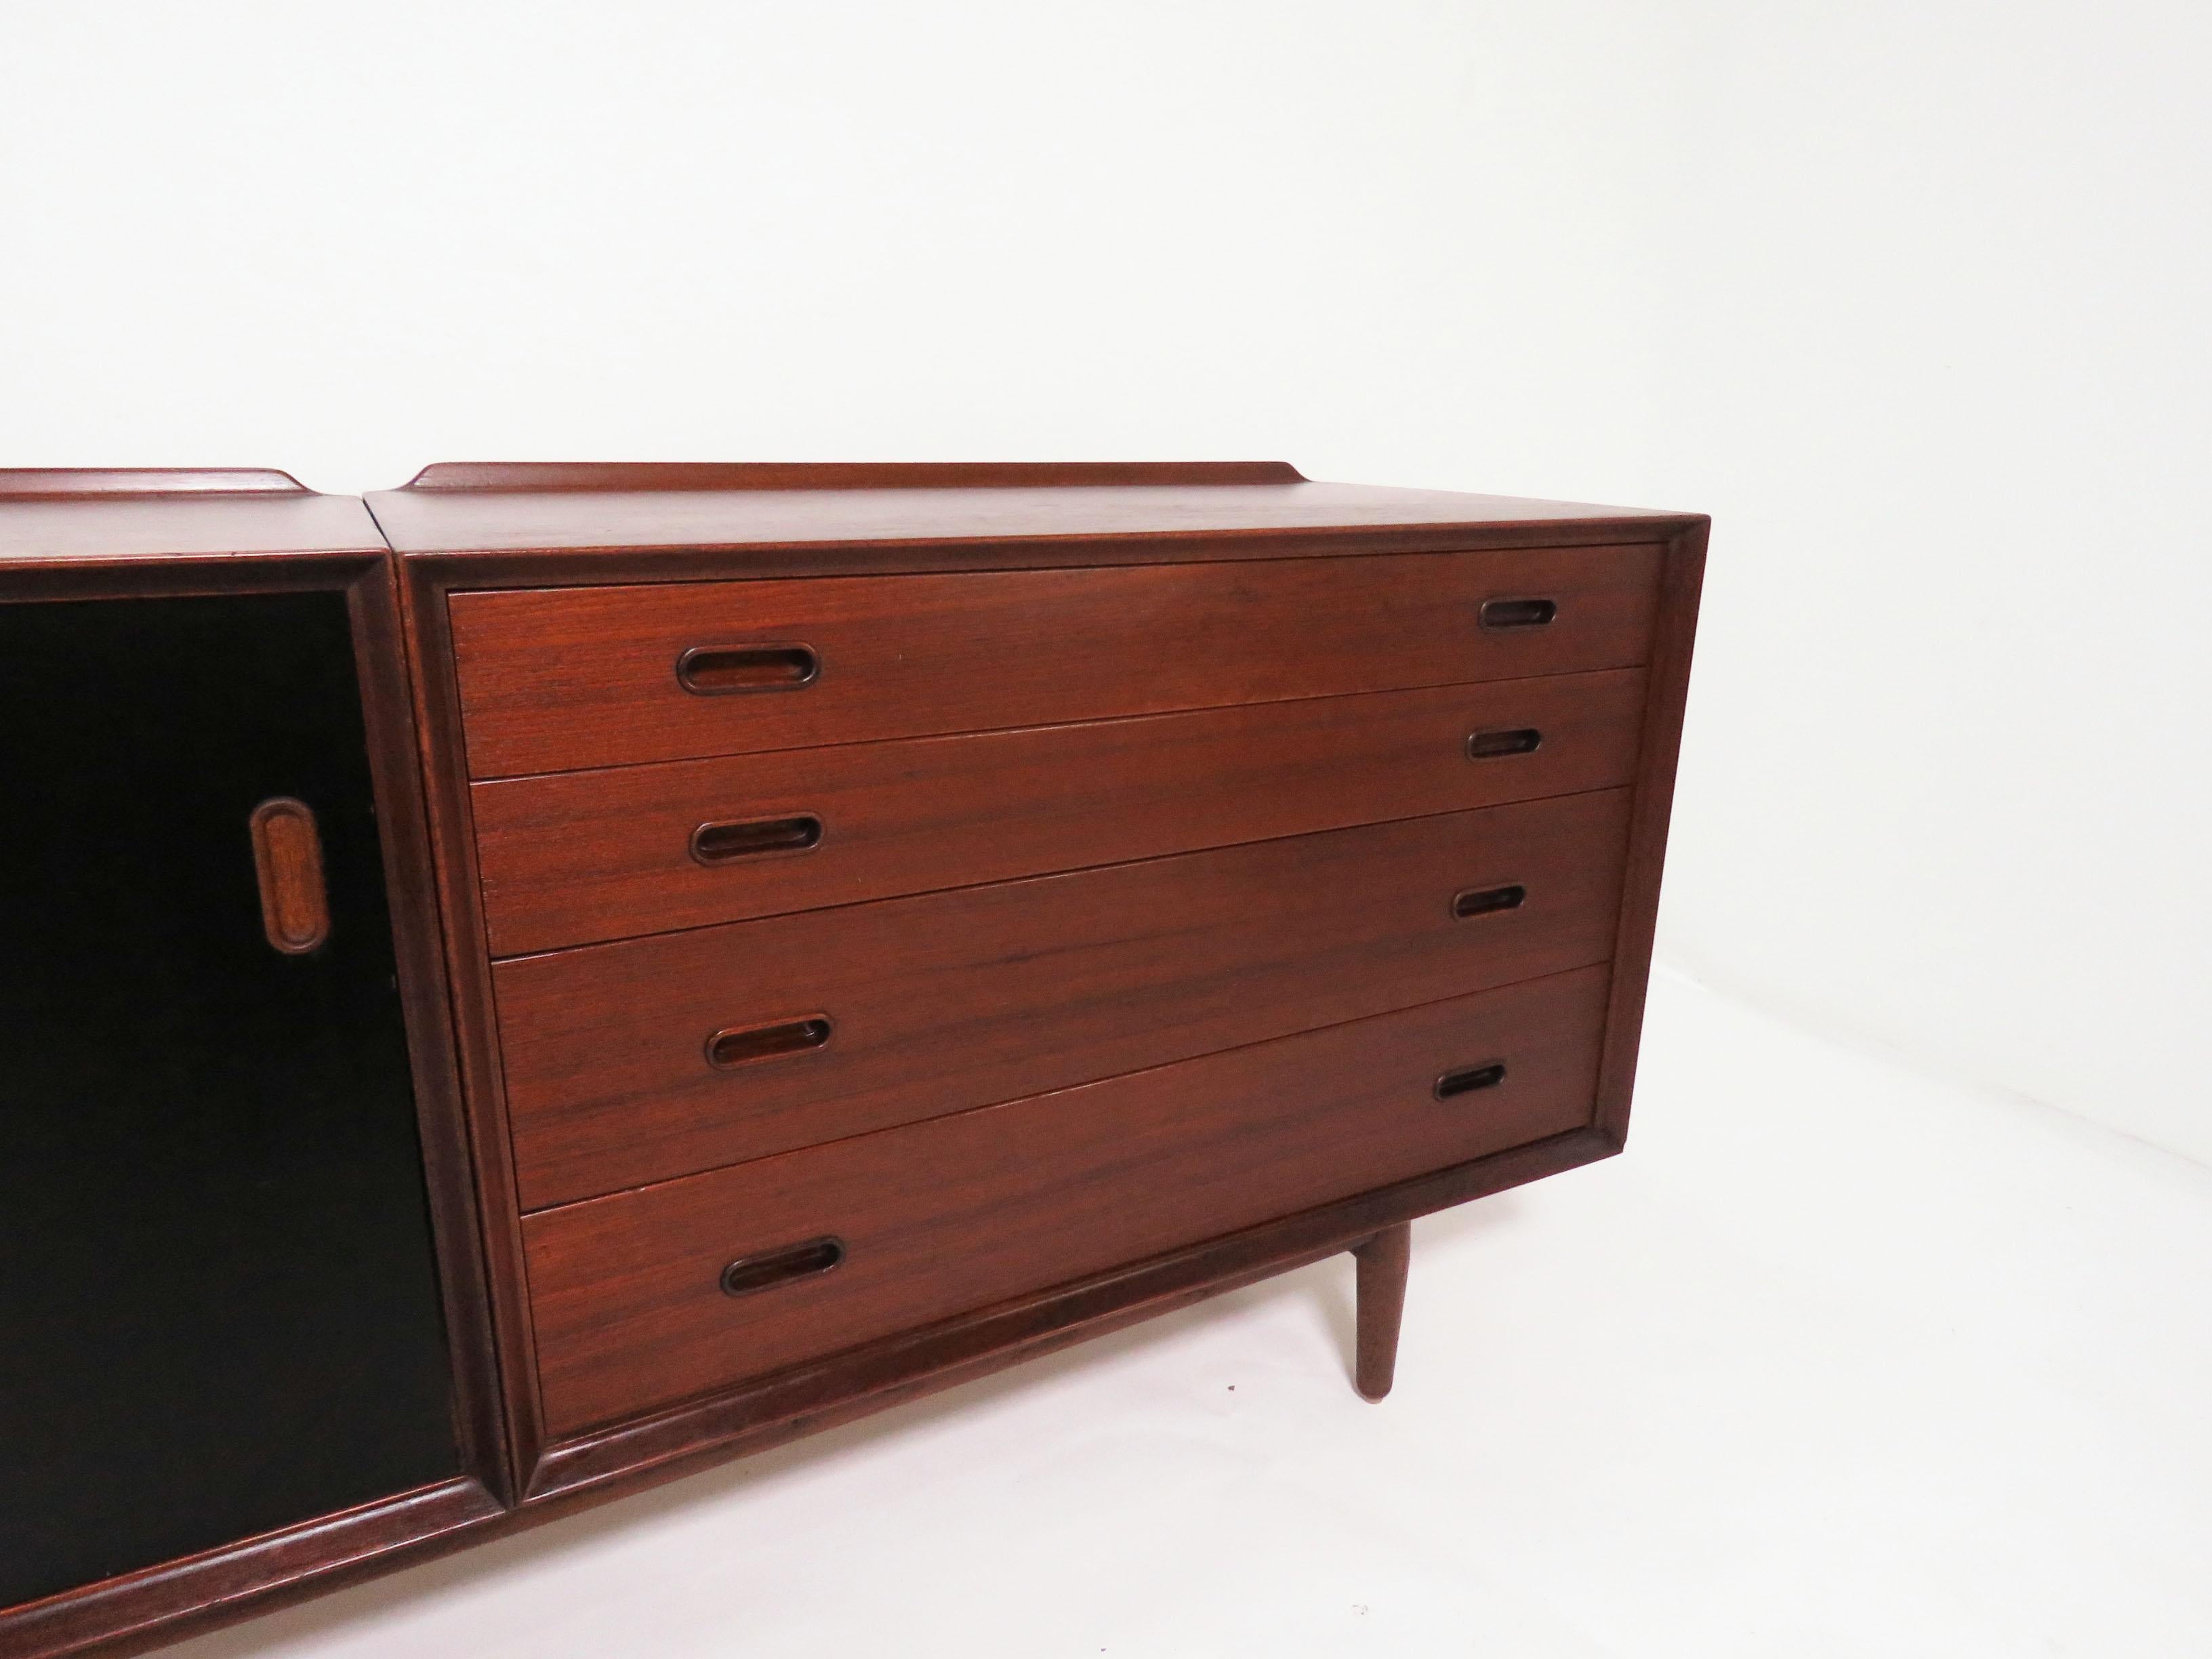 Danish teak credenza designed by Arne Vodder, made by Sibast, Denmark, circa 1960s. The black lacquered doors are reversible to teak fronts. Further, as this consists of two cabinets (a unit of drawers and a sliding door unit) that mount onto the